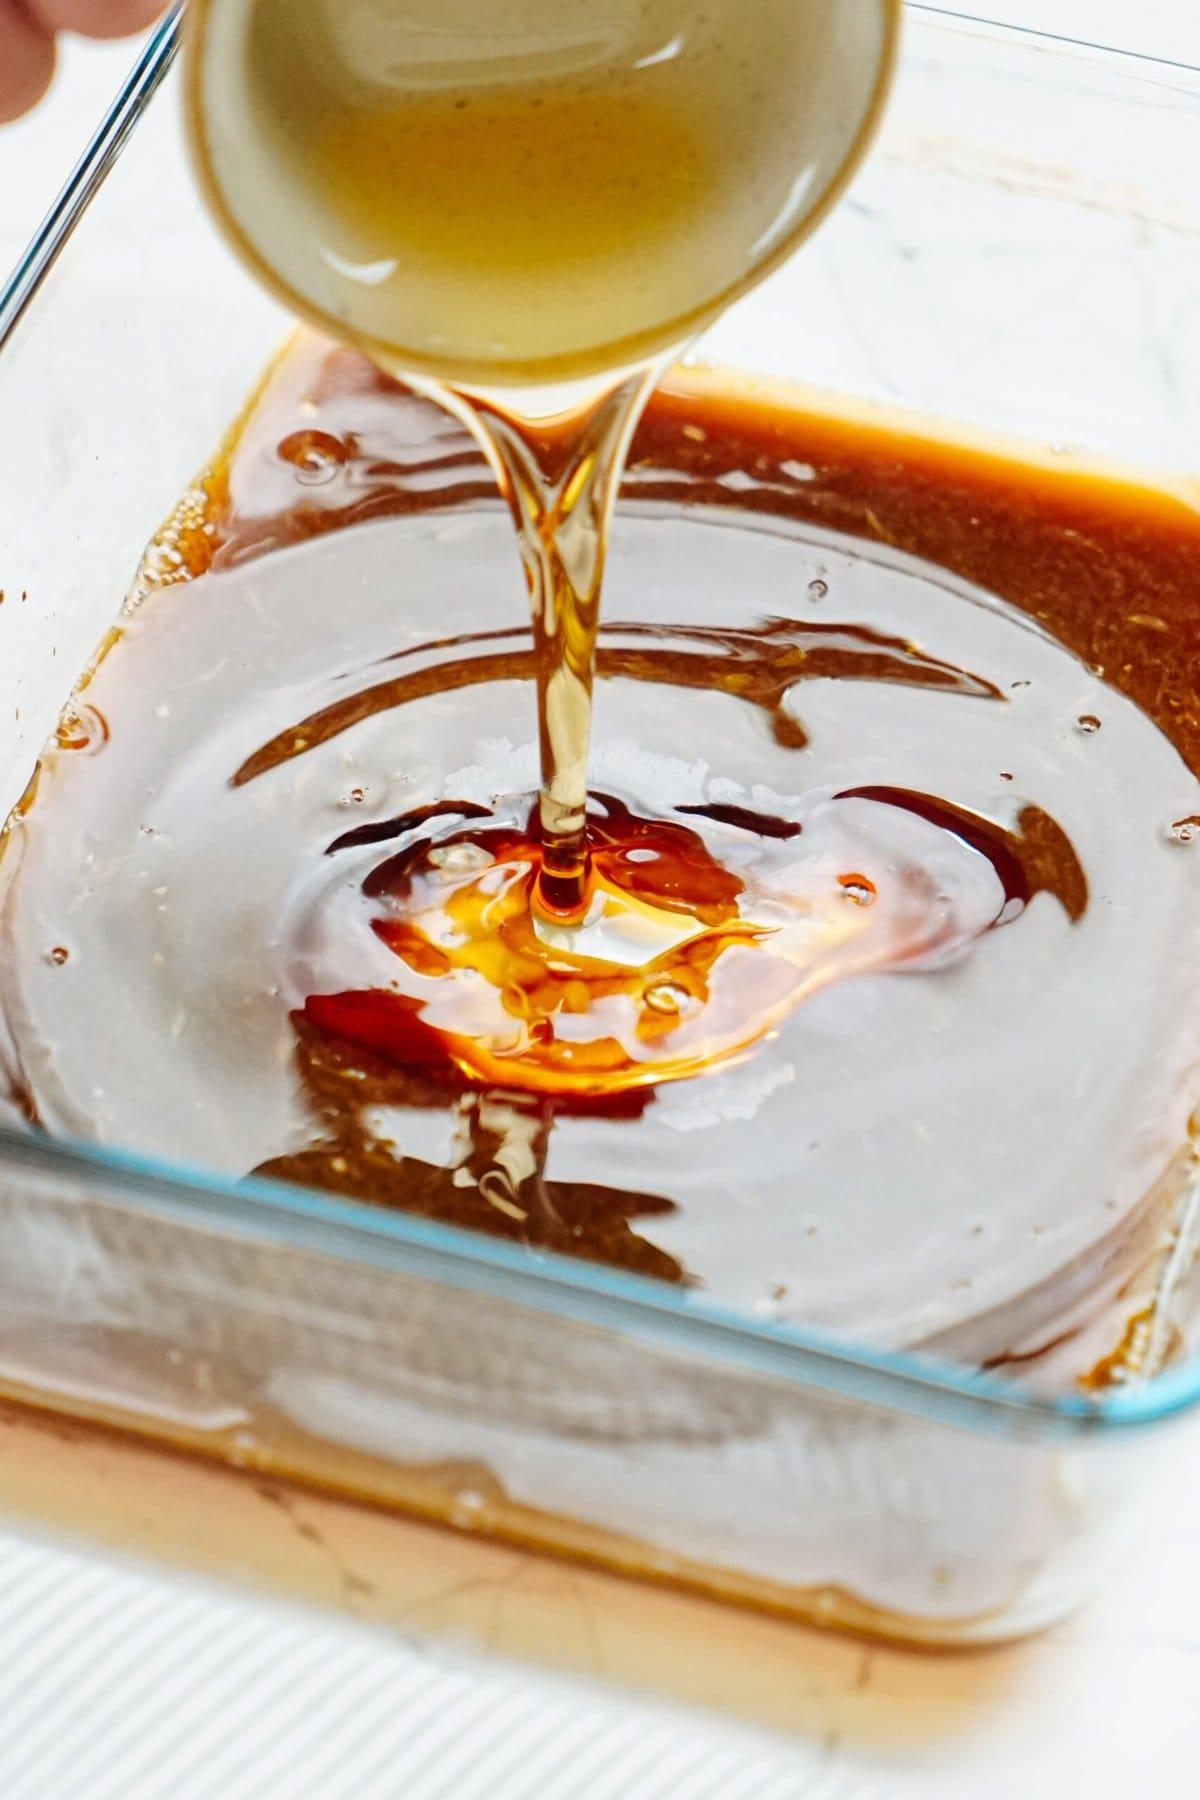 A person is pouring syrup into a baking dish